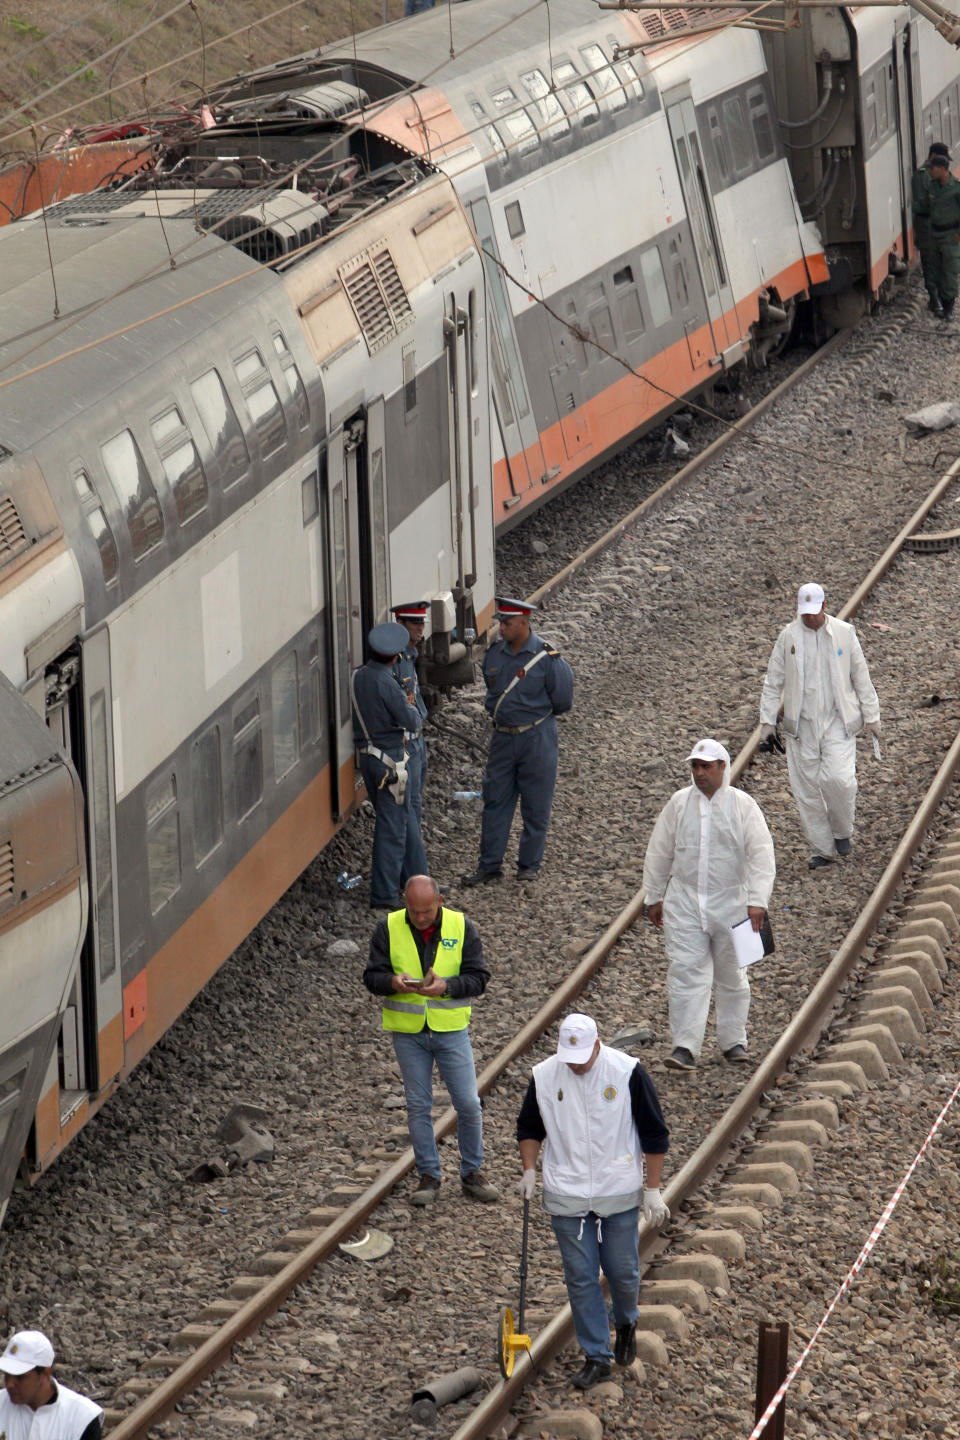 Police officers and rail workers stand by a derailed train Tuesday Oct.16, 2018 near Sidi Bouknadel, Morocco. A shuttle train linking the Moroccan capital Rabat to a town further north on the Atlantic coast derailed Tuesday, killing several people and injuring dozens, Moroccan authorities and the state news agency said. (AP Photo/Abdeljalil Bounhar)